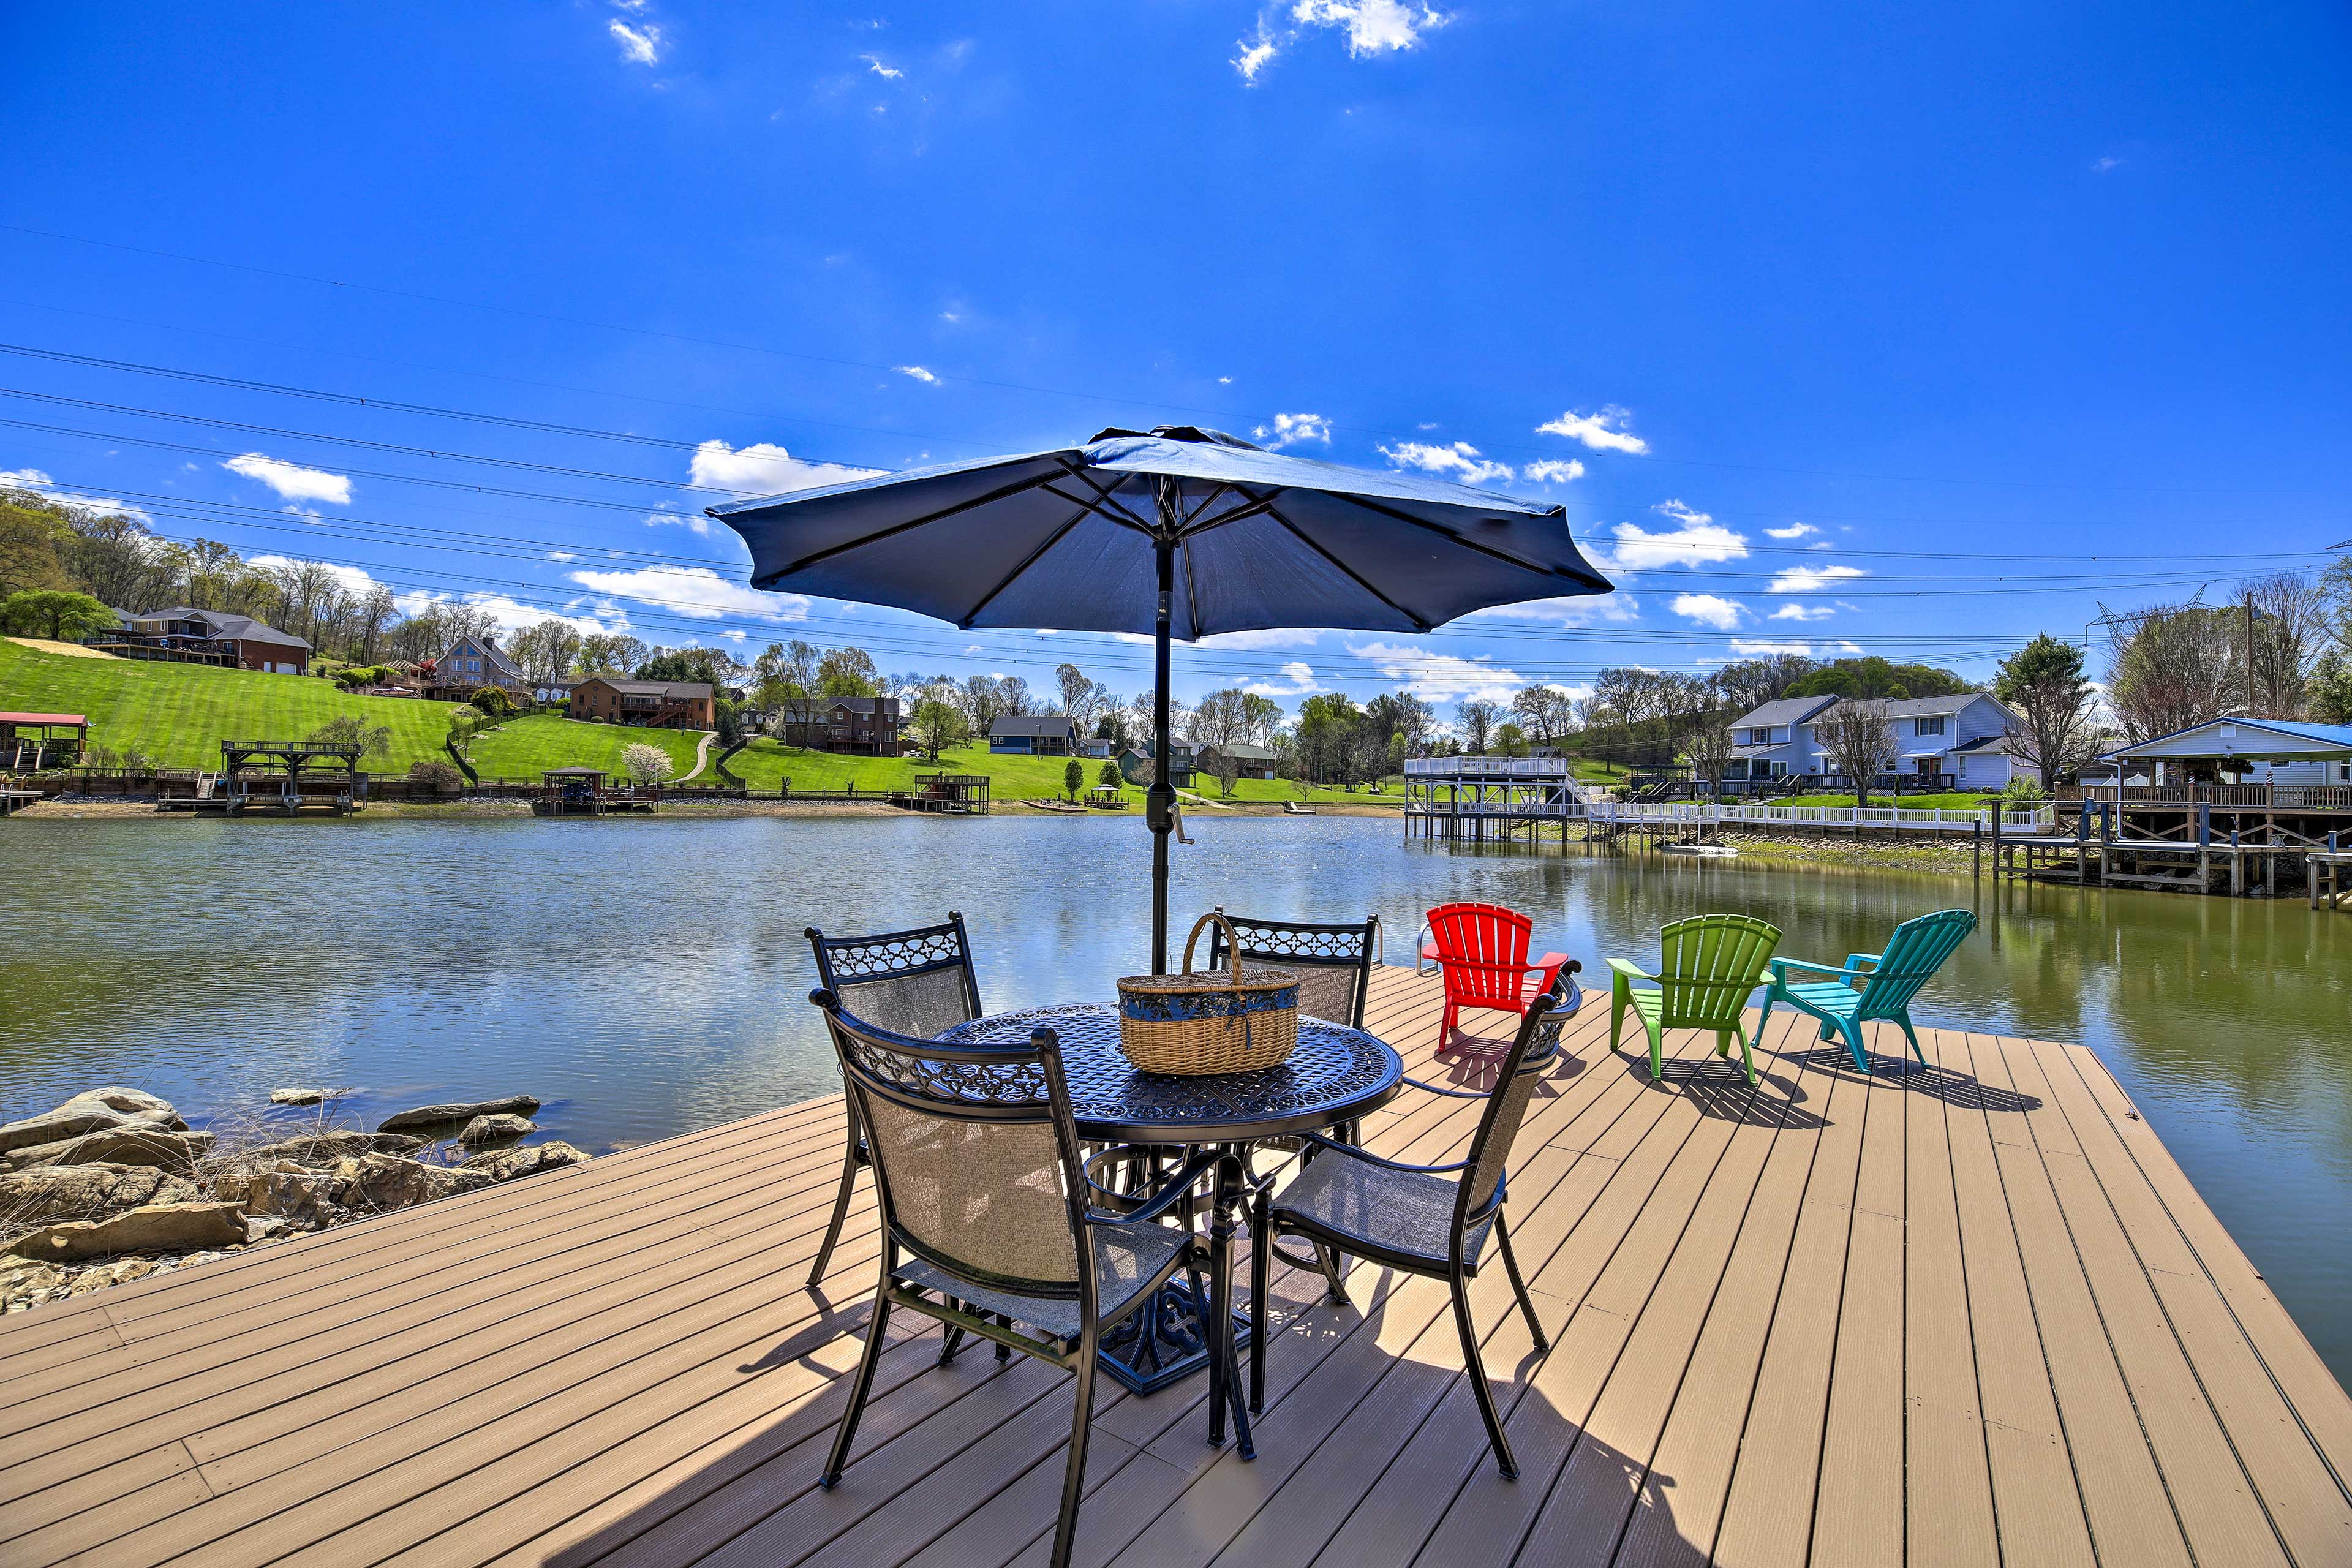 Property Image 1 - Lake House Haven: Fire Pit, Boat Dock + More!